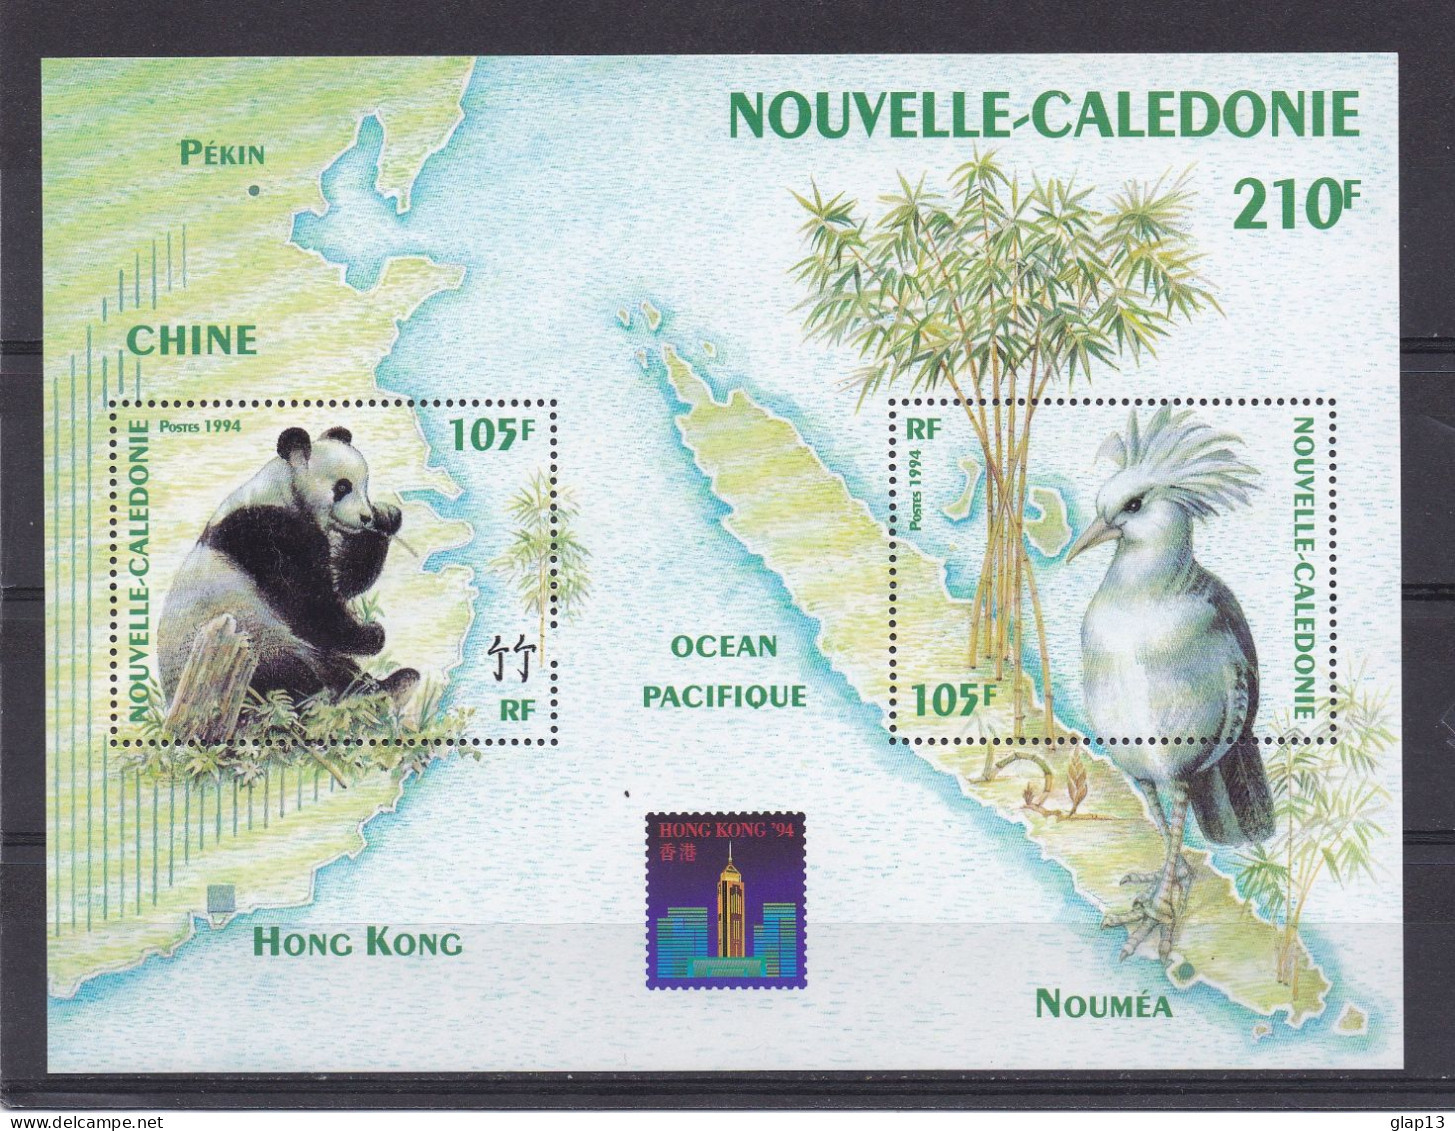 NOUVELLE-CALEDONIE 1994 BLOC N°16 NEUF** ANIMAUX - Hojas Y Bloques